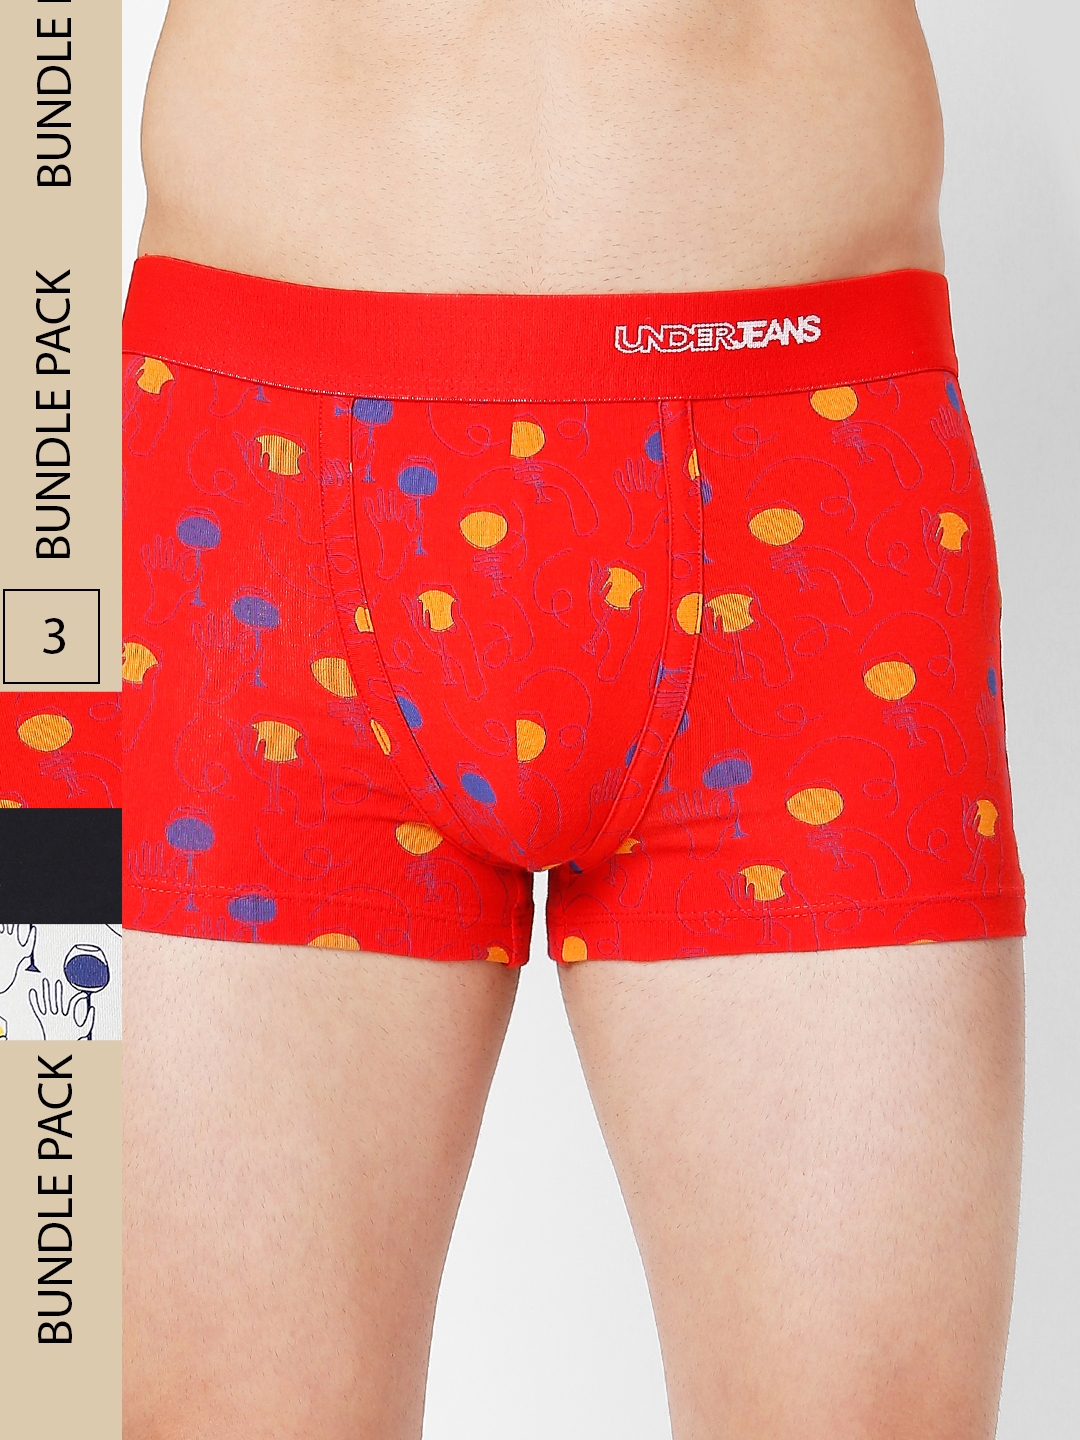 Underjeans by Spykar Premium Blue Red & Navy Cotton Blend Printed Trunk - Pack Of 3